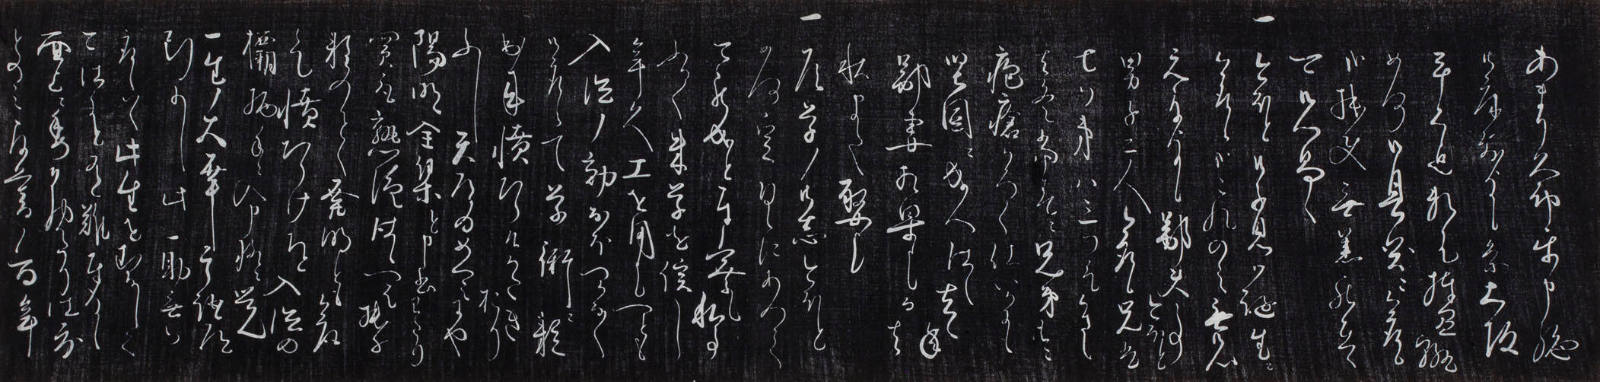 Part of a Letter Written by Nakae Toju Addressed to Ikeda Yohei